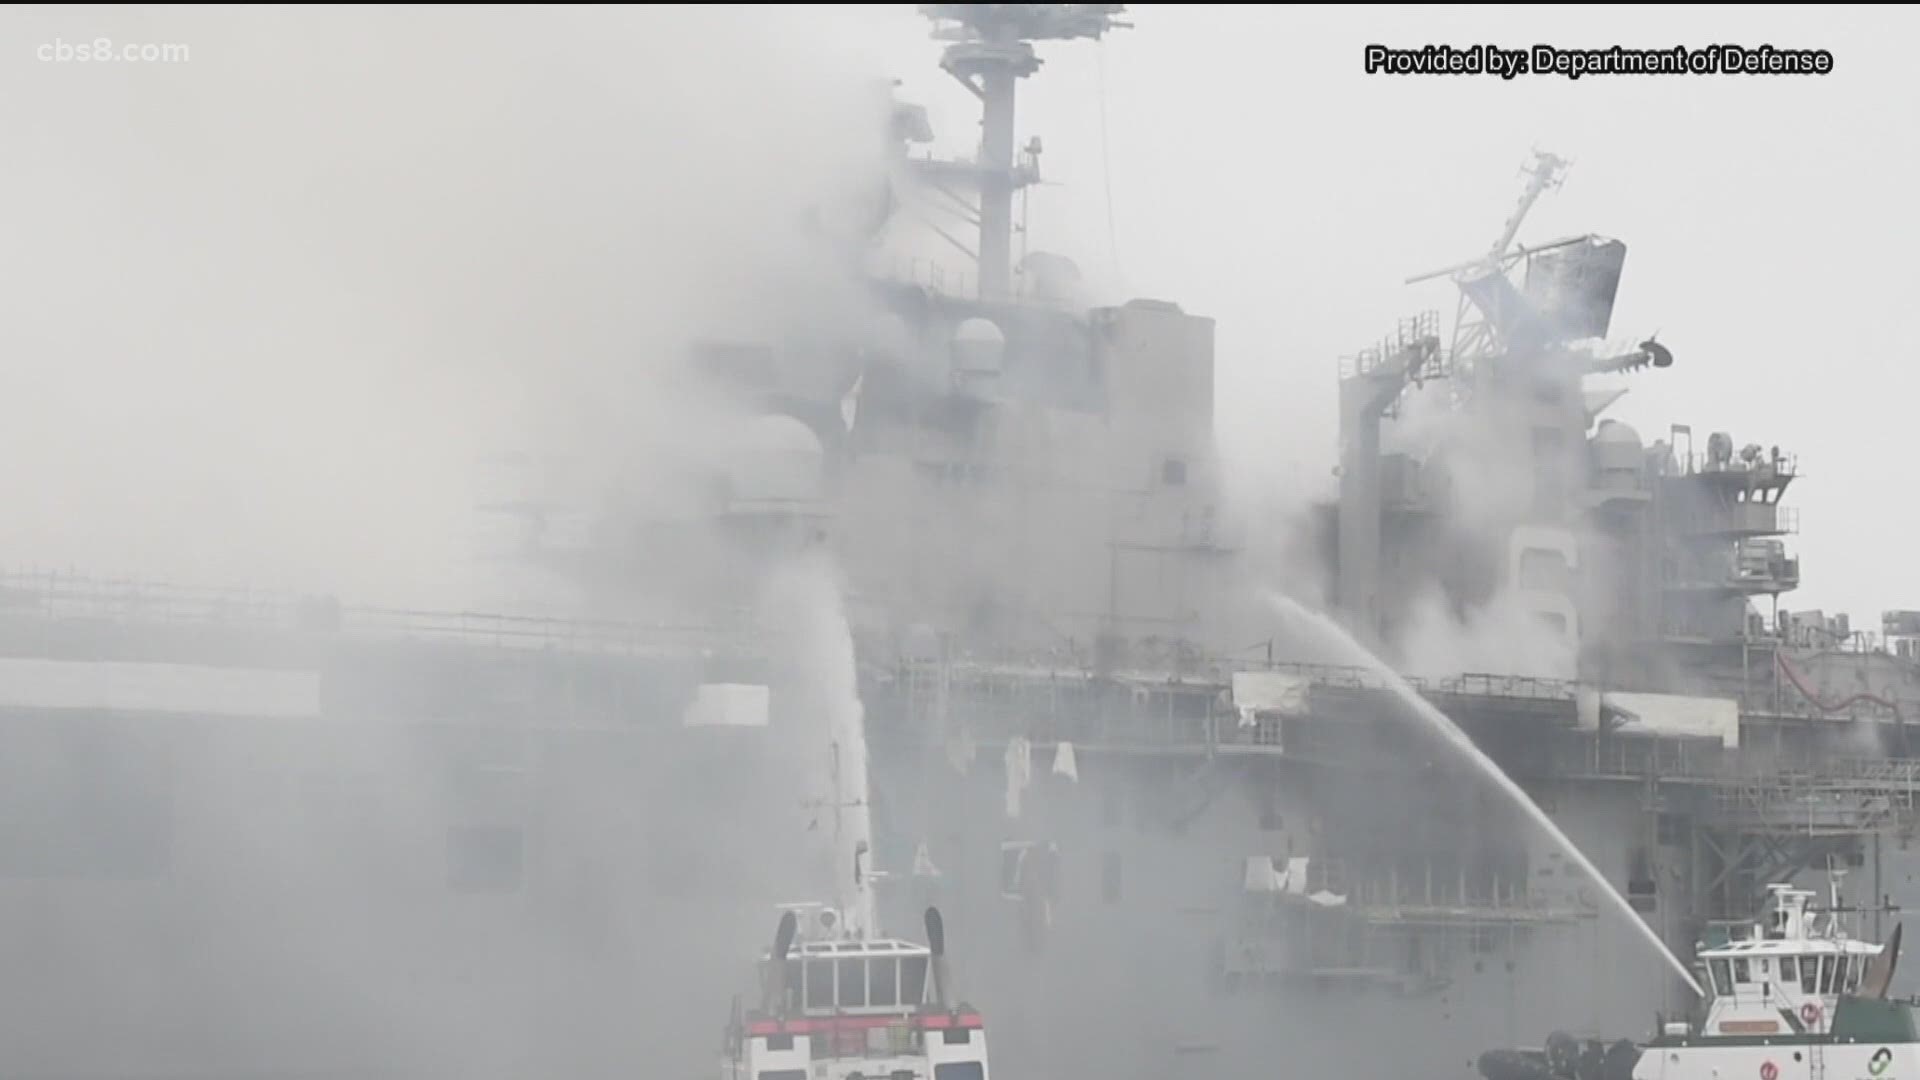 News 8's Heather Hope reports on the latest as firefighters continue to work for a 4th day to contain the fire on the USS Bonhomme Richard.